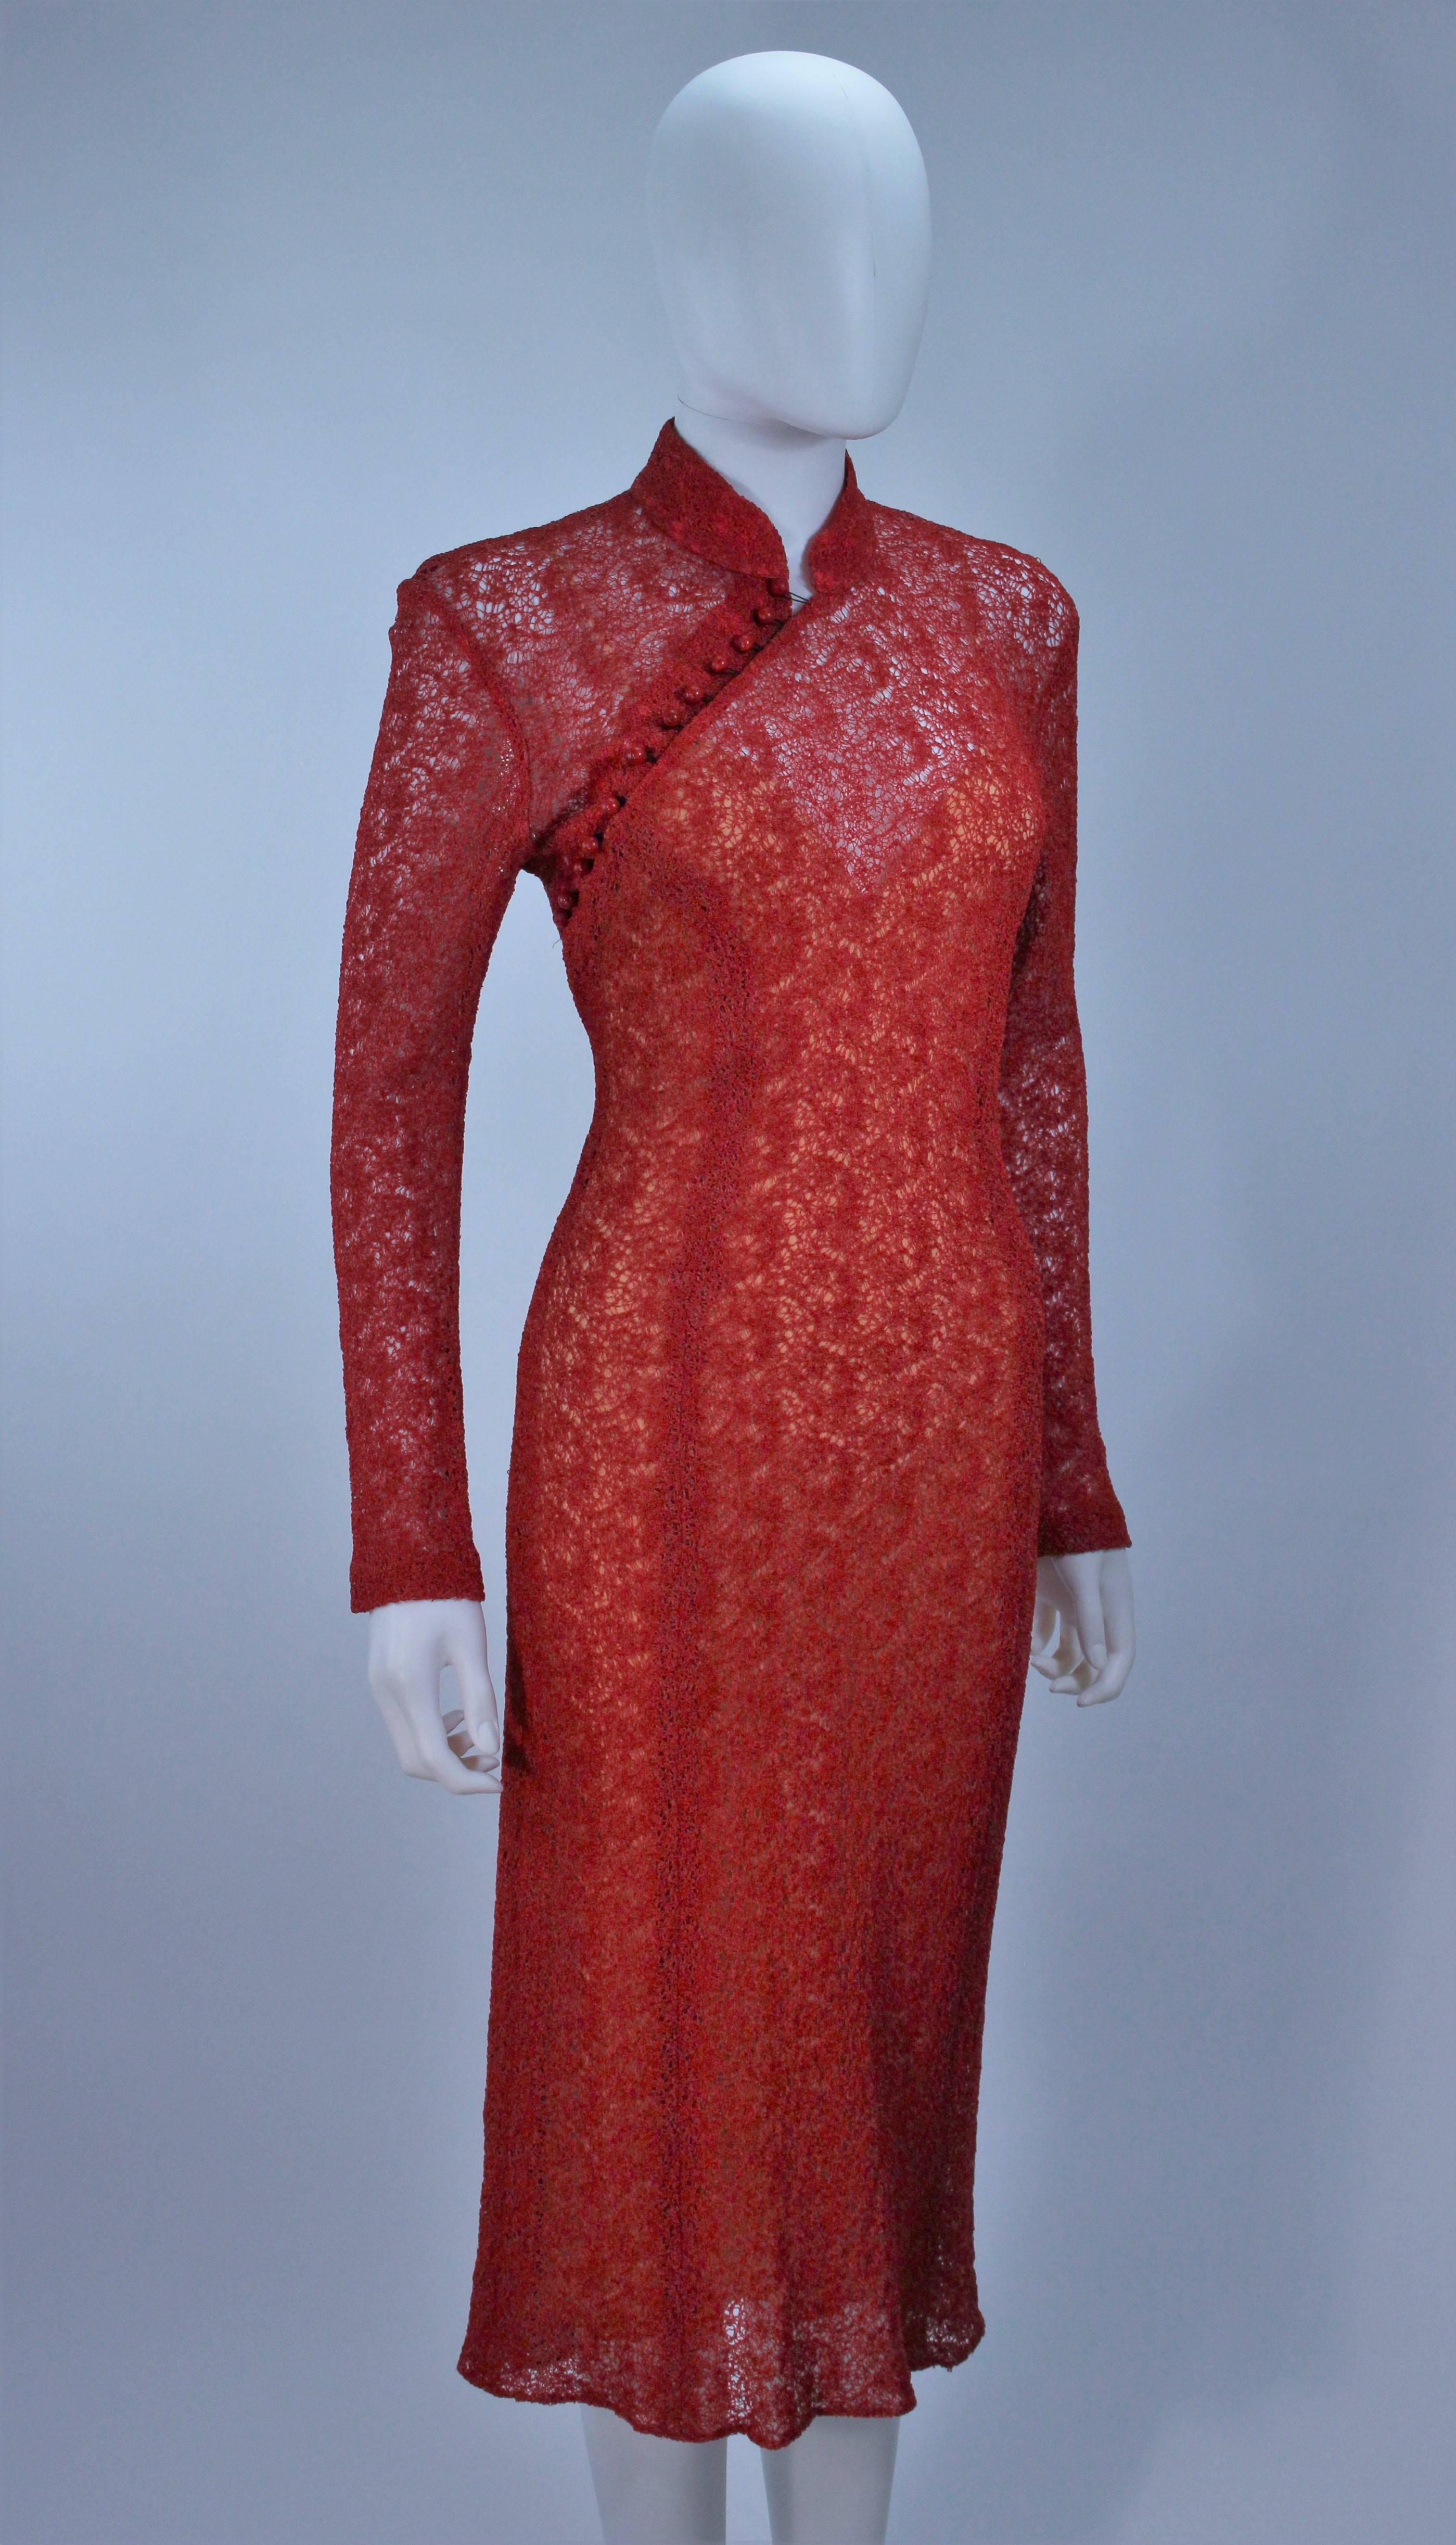 Red MONIQUE LHUILLIER Asian Inspired Deep Coral Knit lace Cocktail Dress Size 8